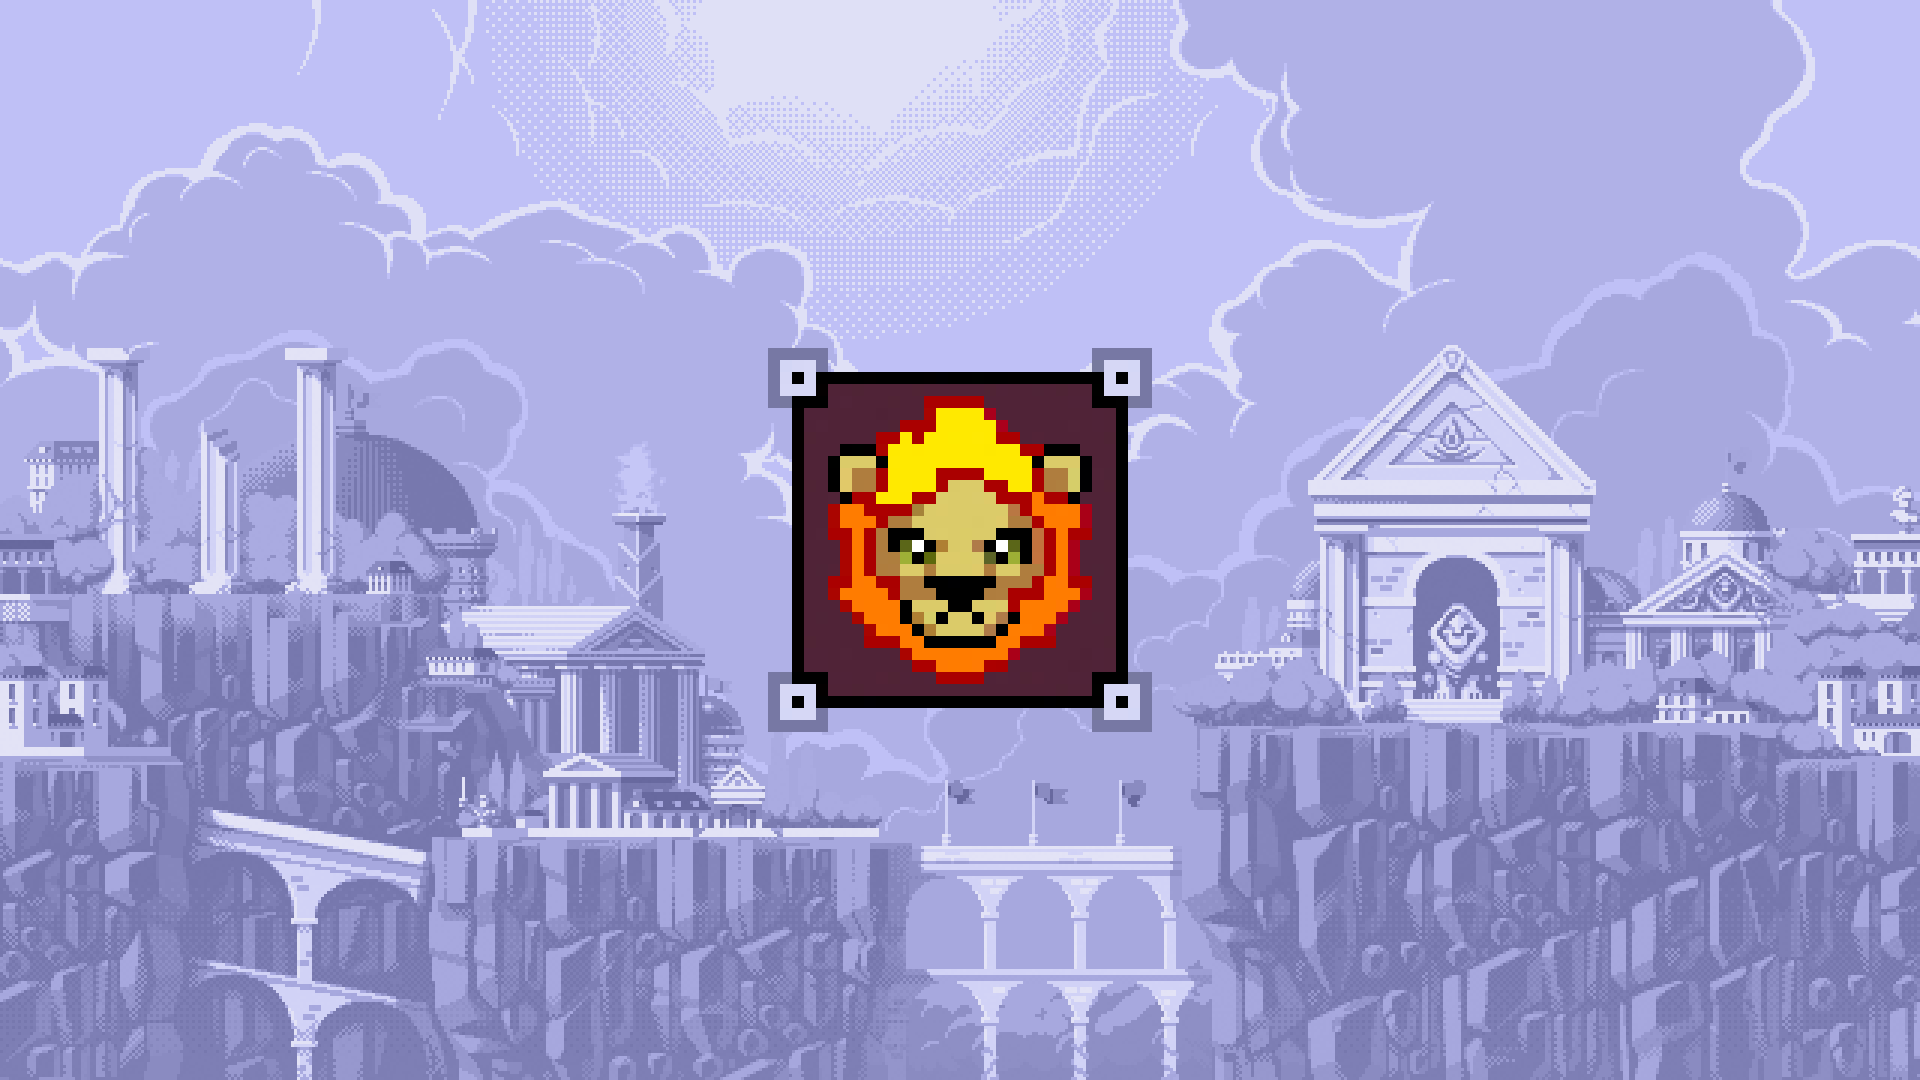 Icon for A Fiery Tale